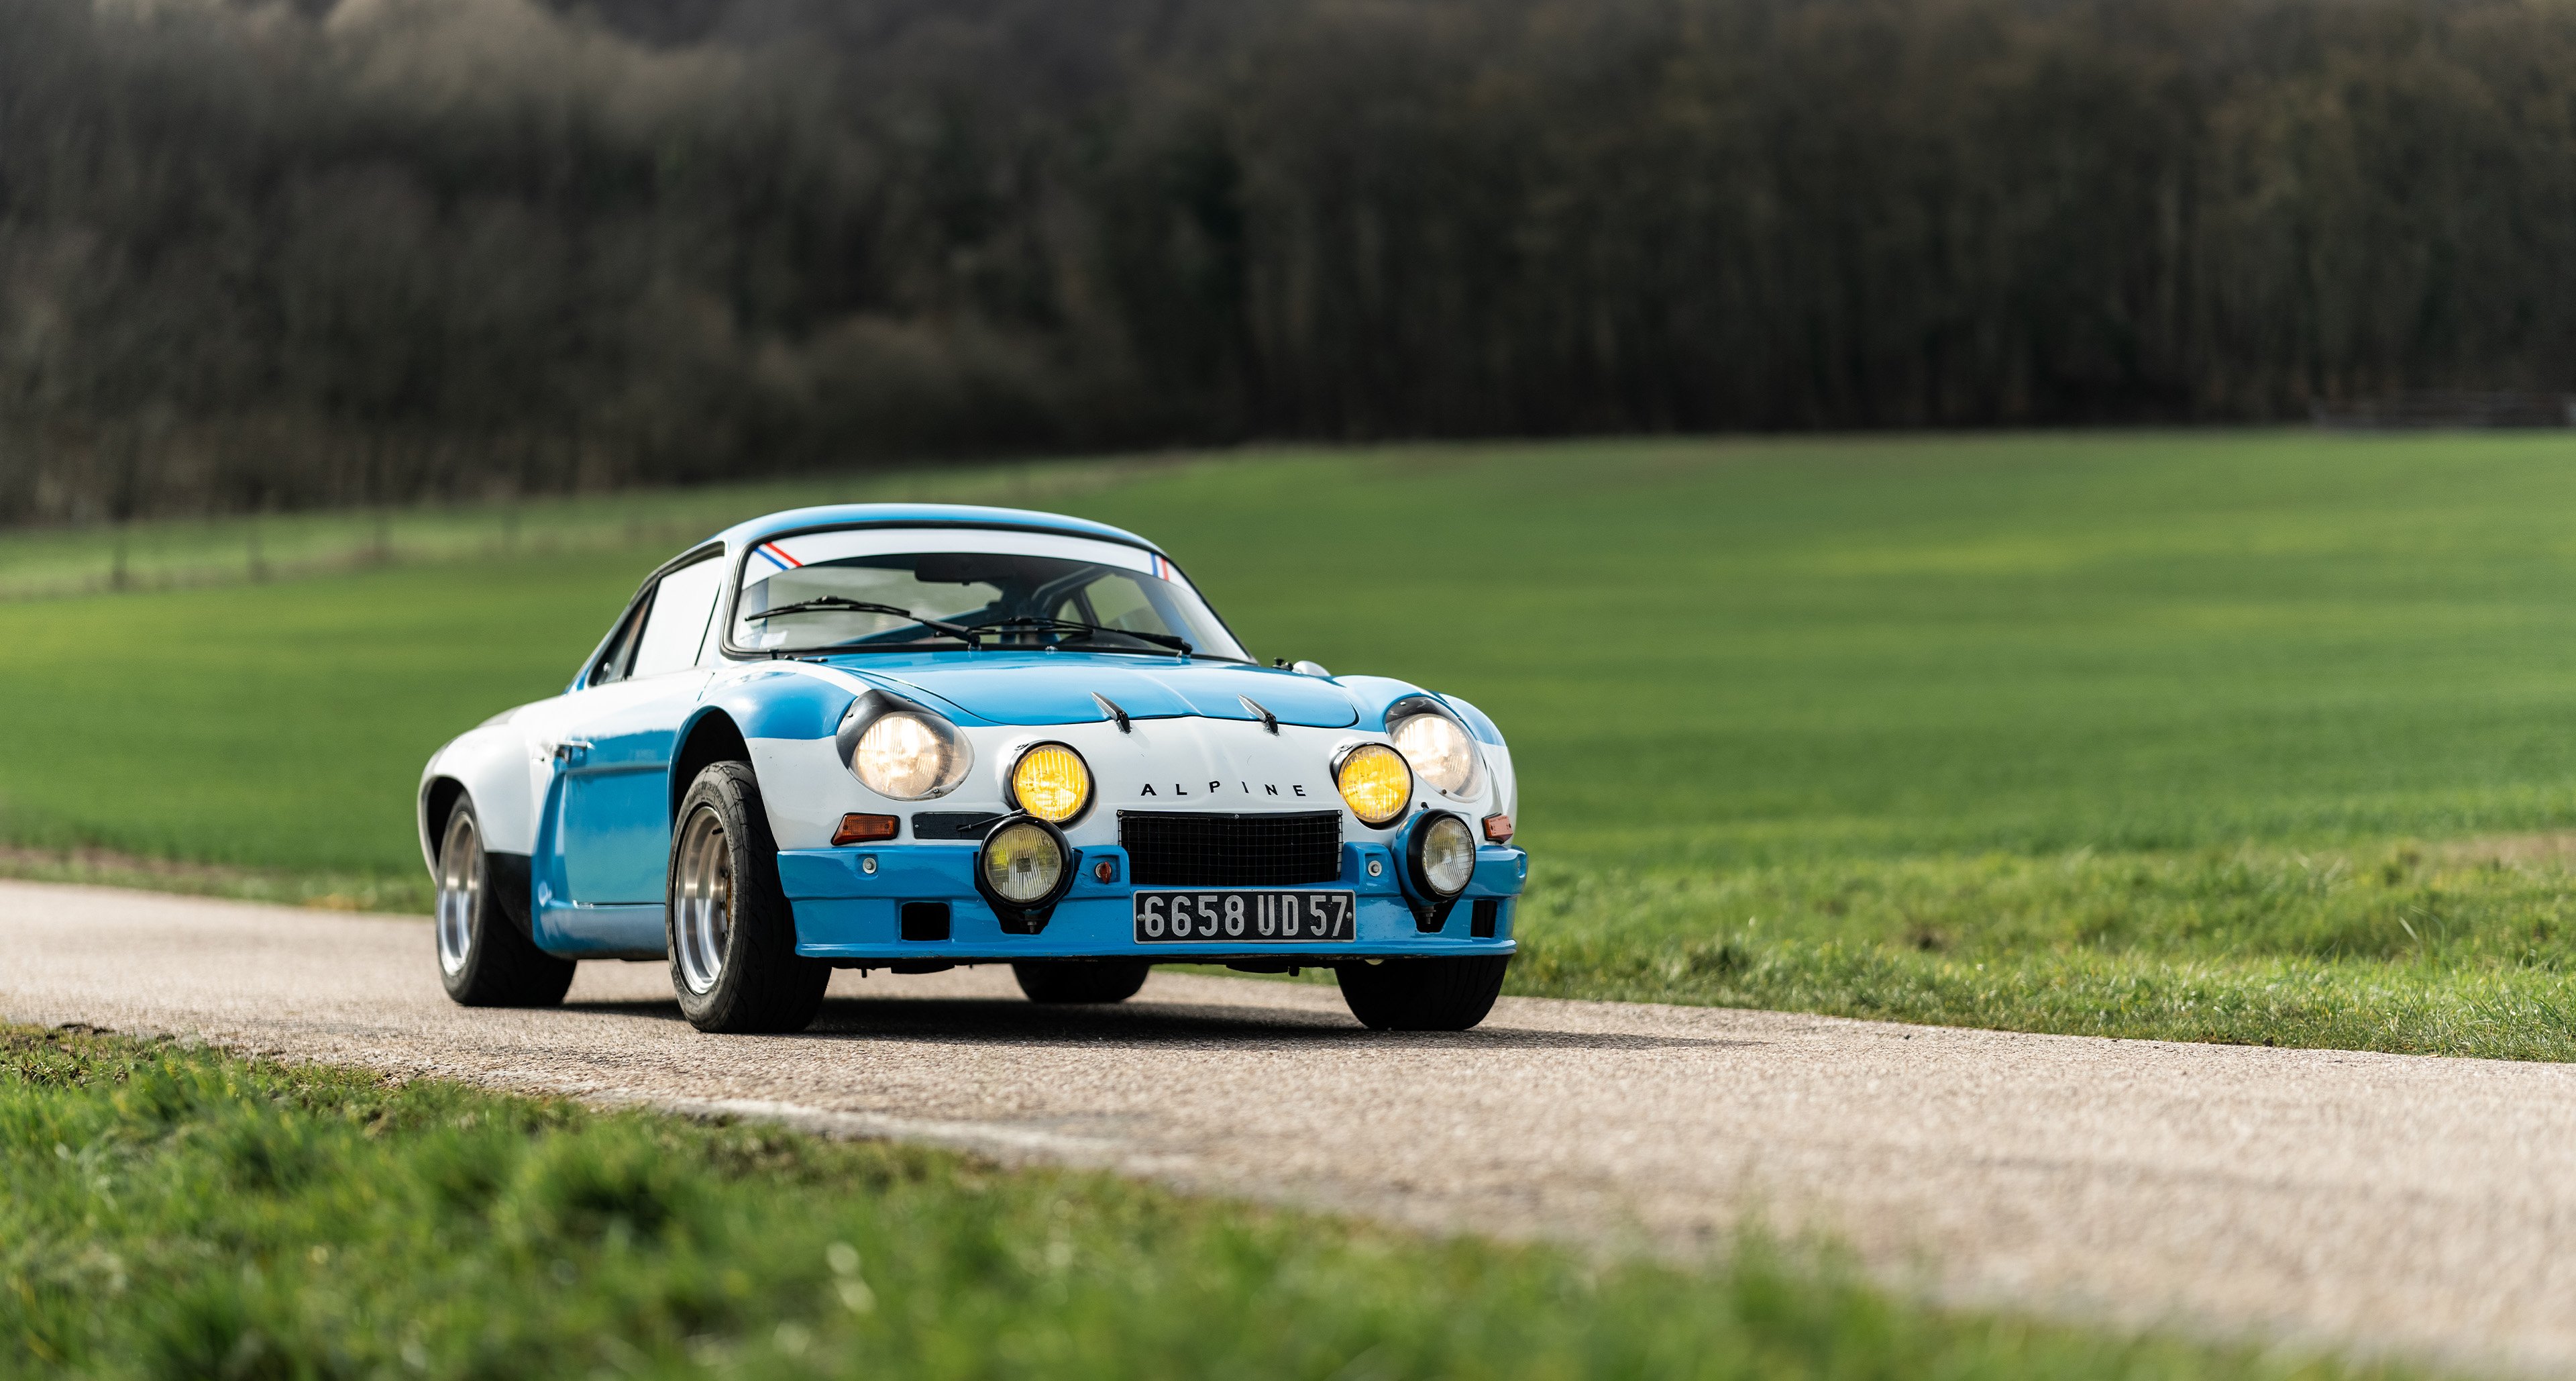 Marvel at the first factory-raced Alpine A110 1600 S Berlinette